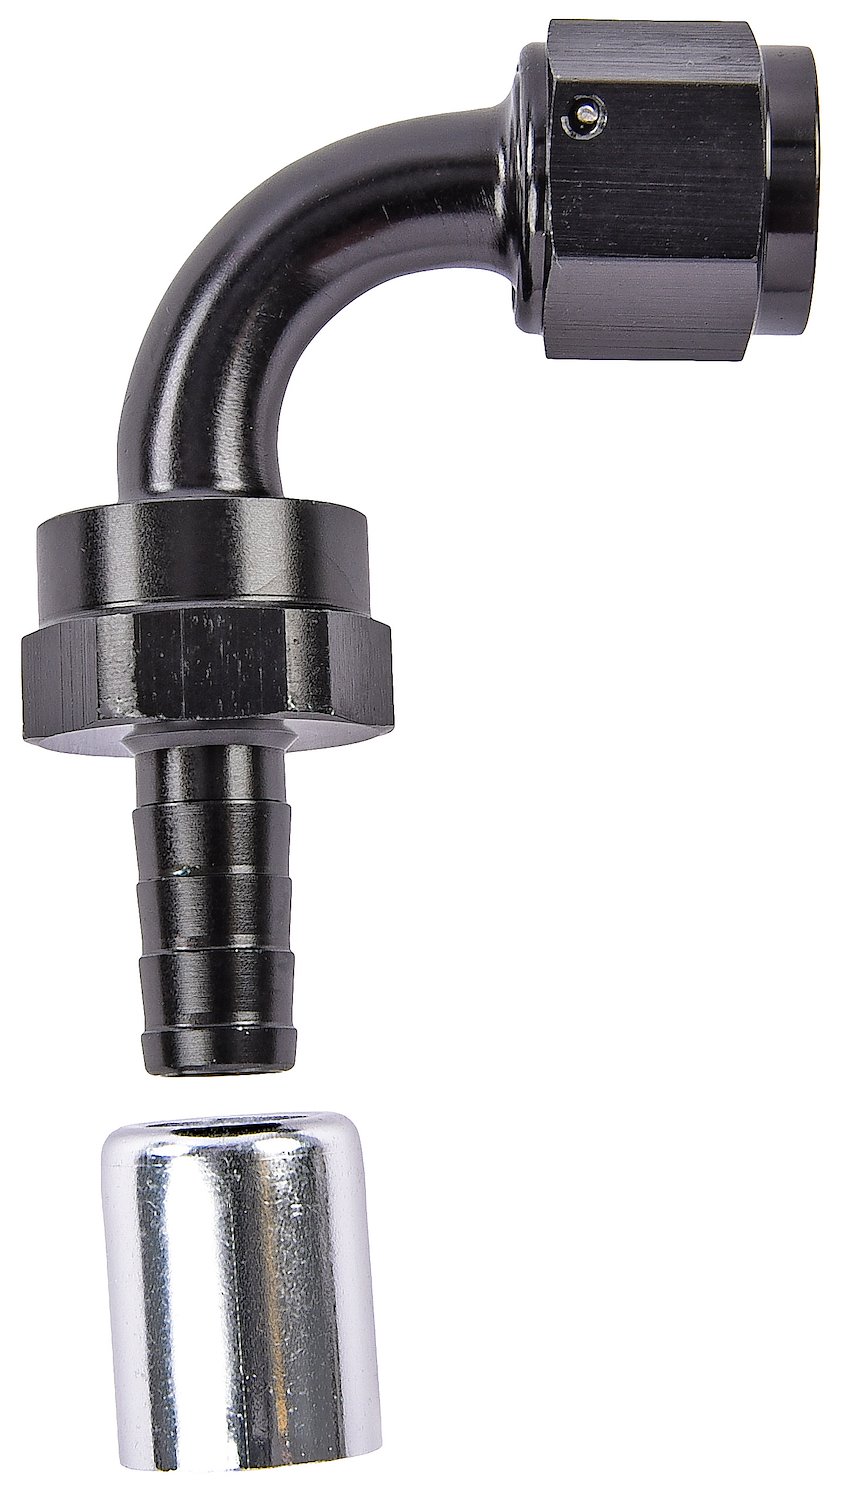 90-Degree AN Crimp-On Hose End Fitting [-8 AN Female to -8 AN Hose, Black]